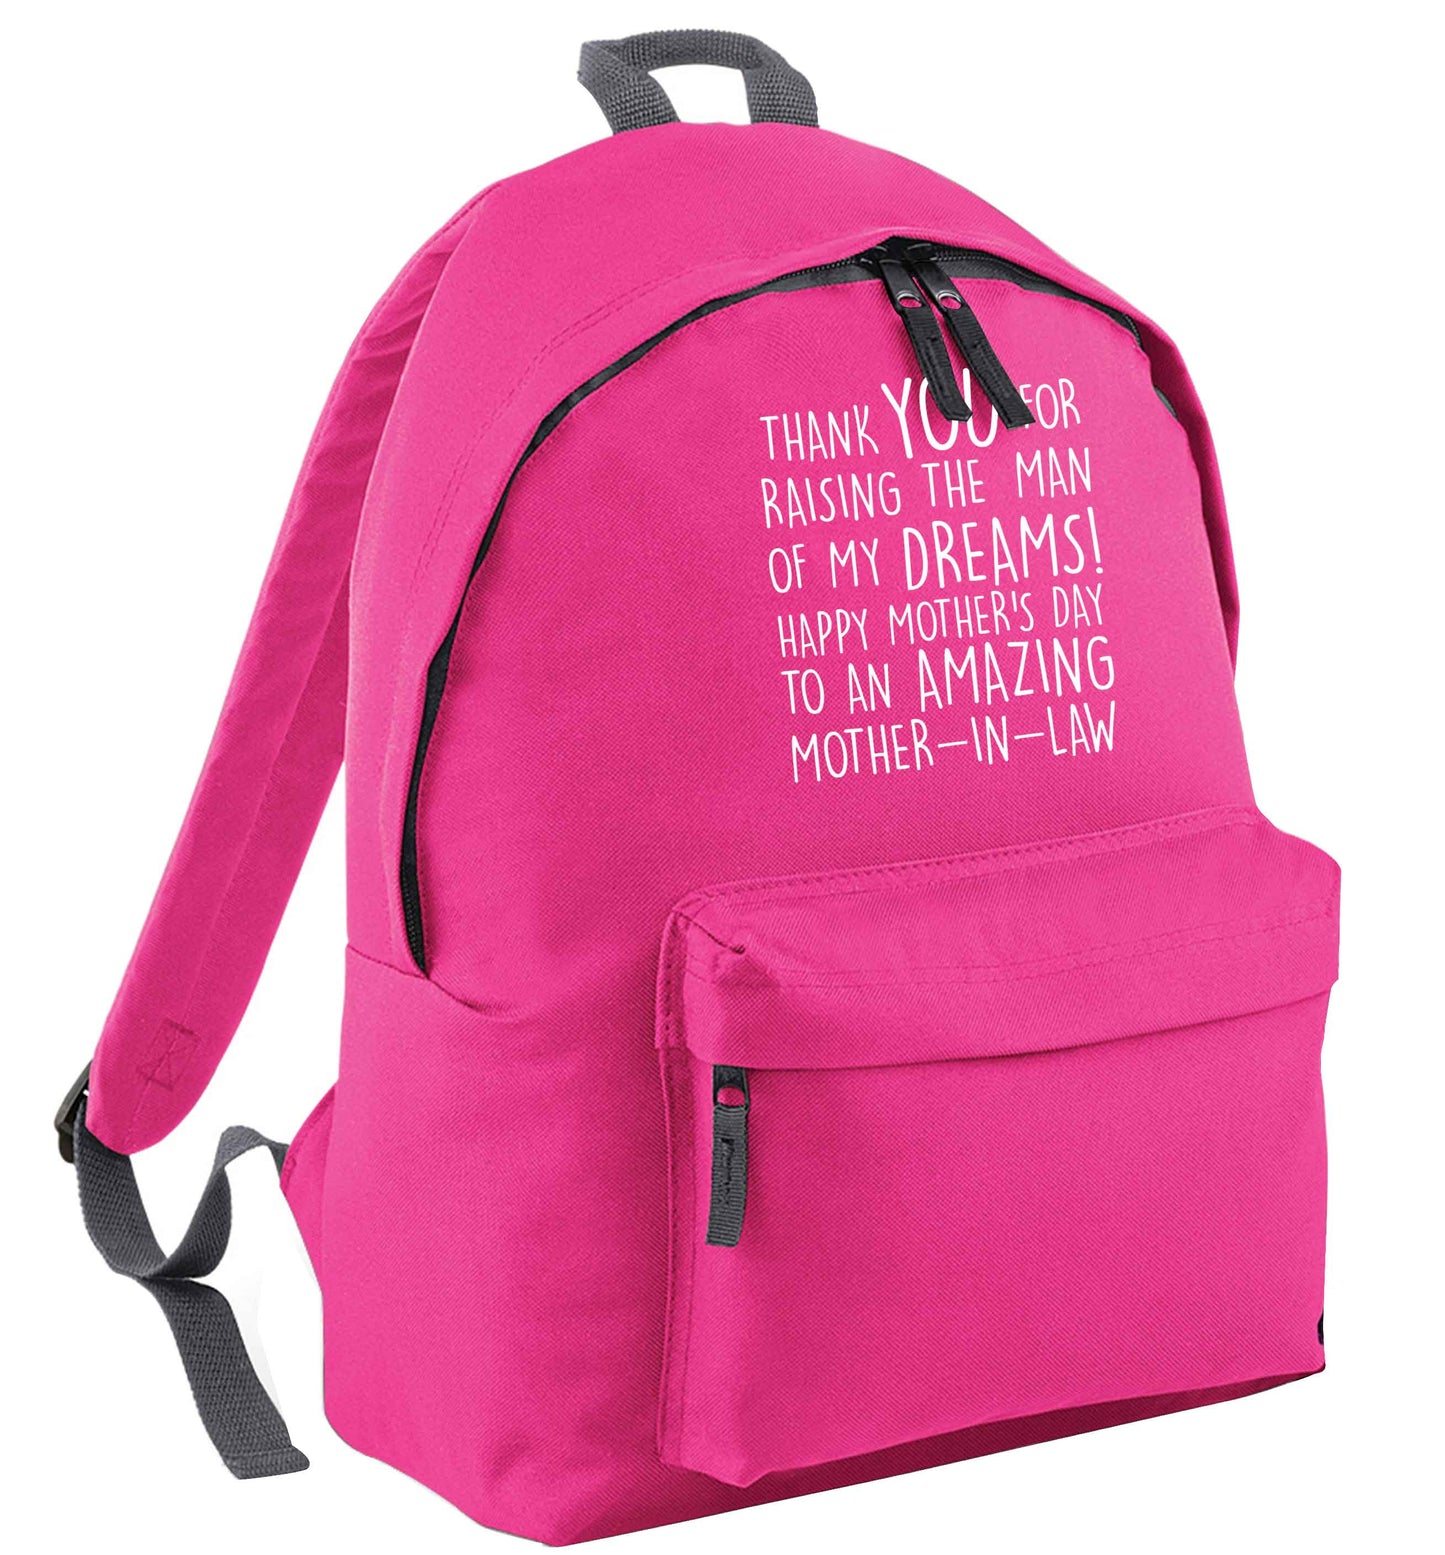 Raising the man of my dreams mother's day mother-in-law pink childrens backpack